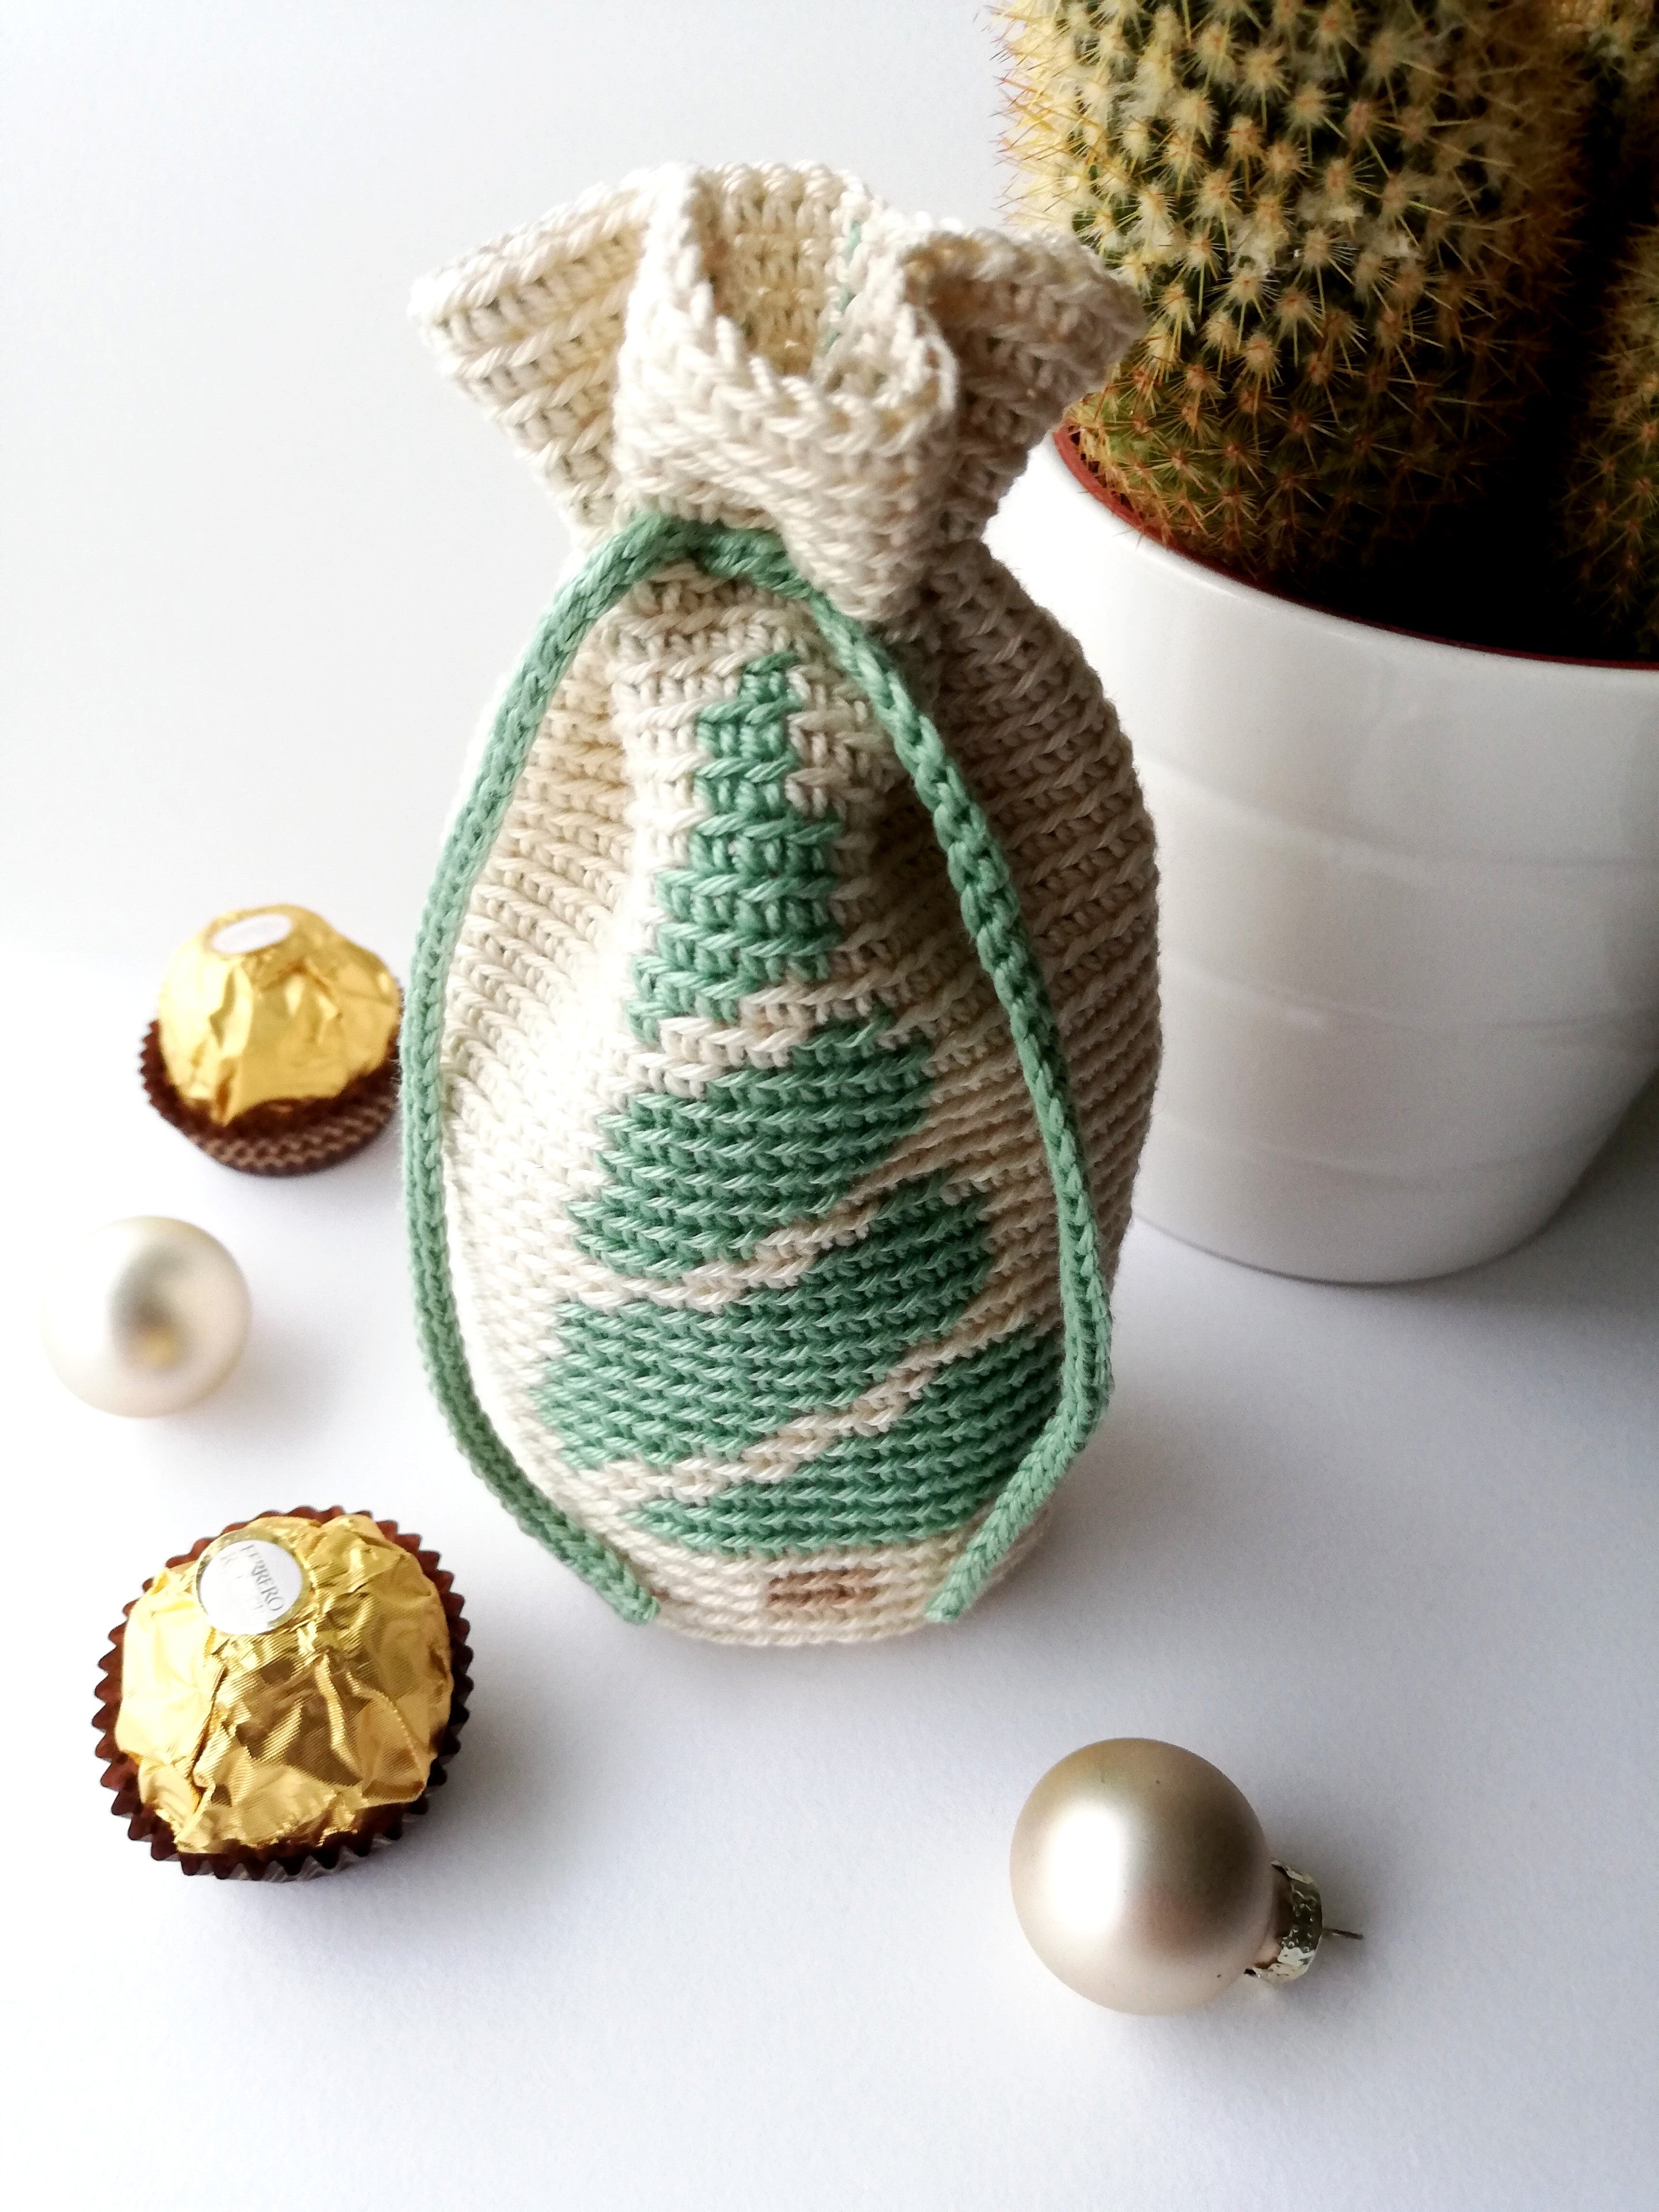 How To Crochet: Christmas Tree Drawstring Pouch